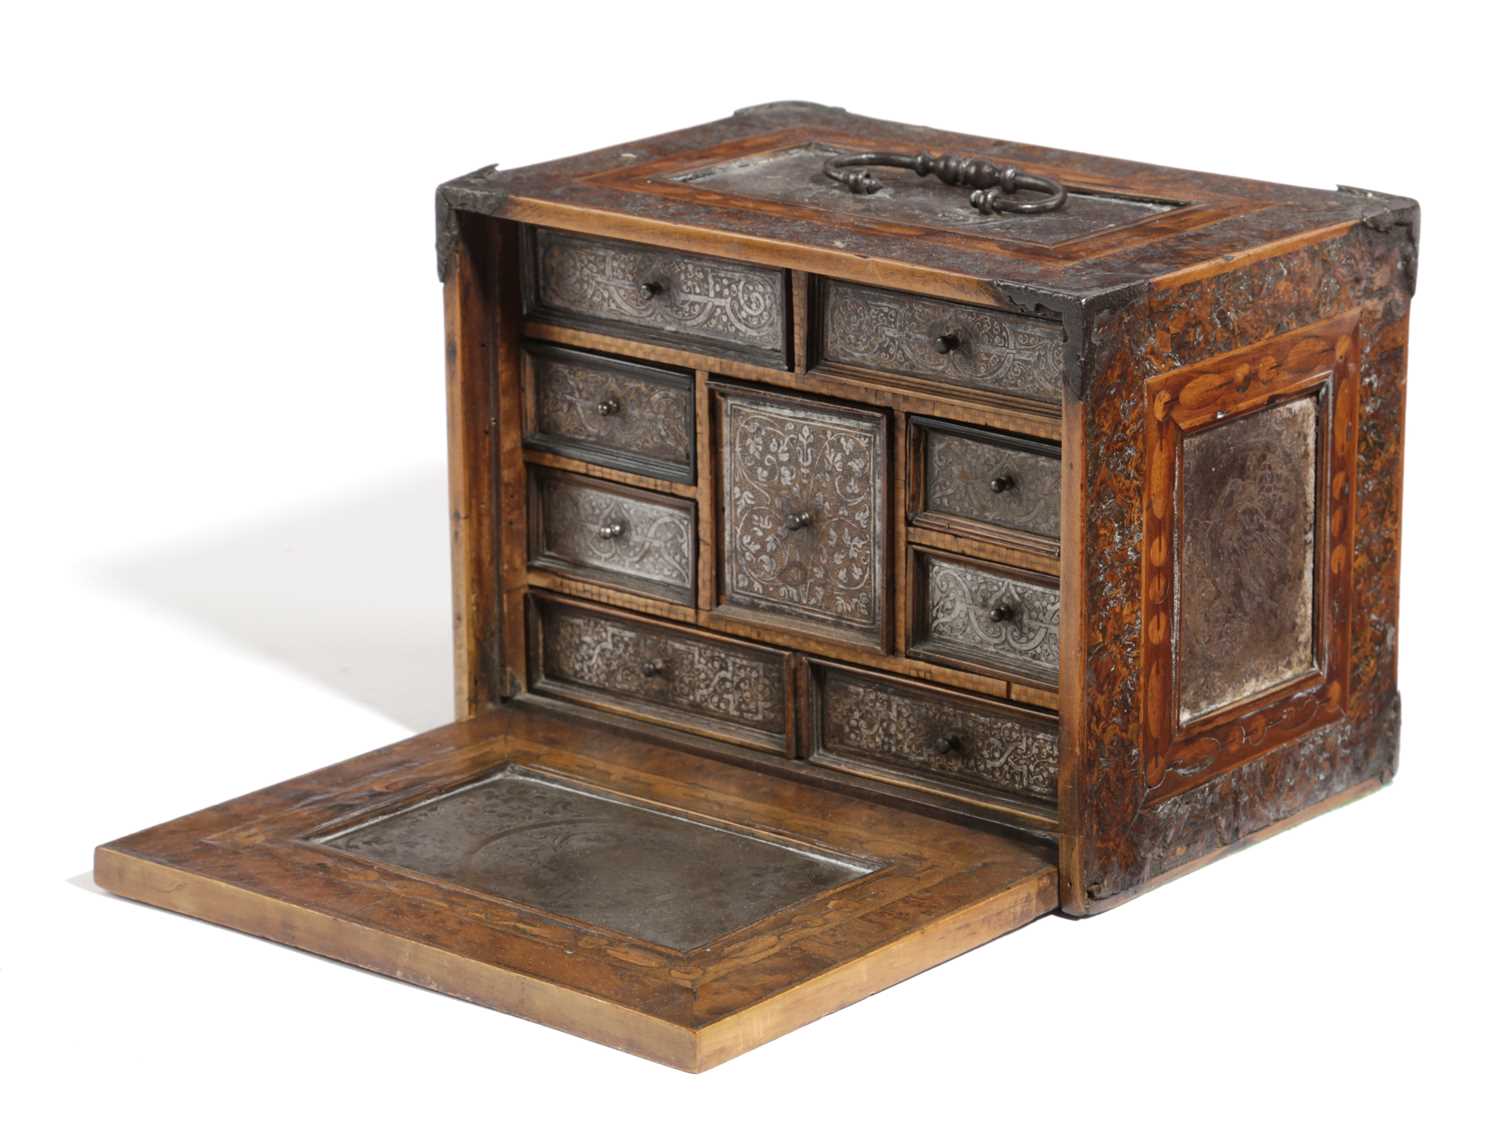 A SOUTH GERMAN BURR YEW, INLAID AND STEEL MOUNTED TABLE CABINET PROBABLY AUGSBURG OR NUREMBURG, LATE - Image 2 of 2